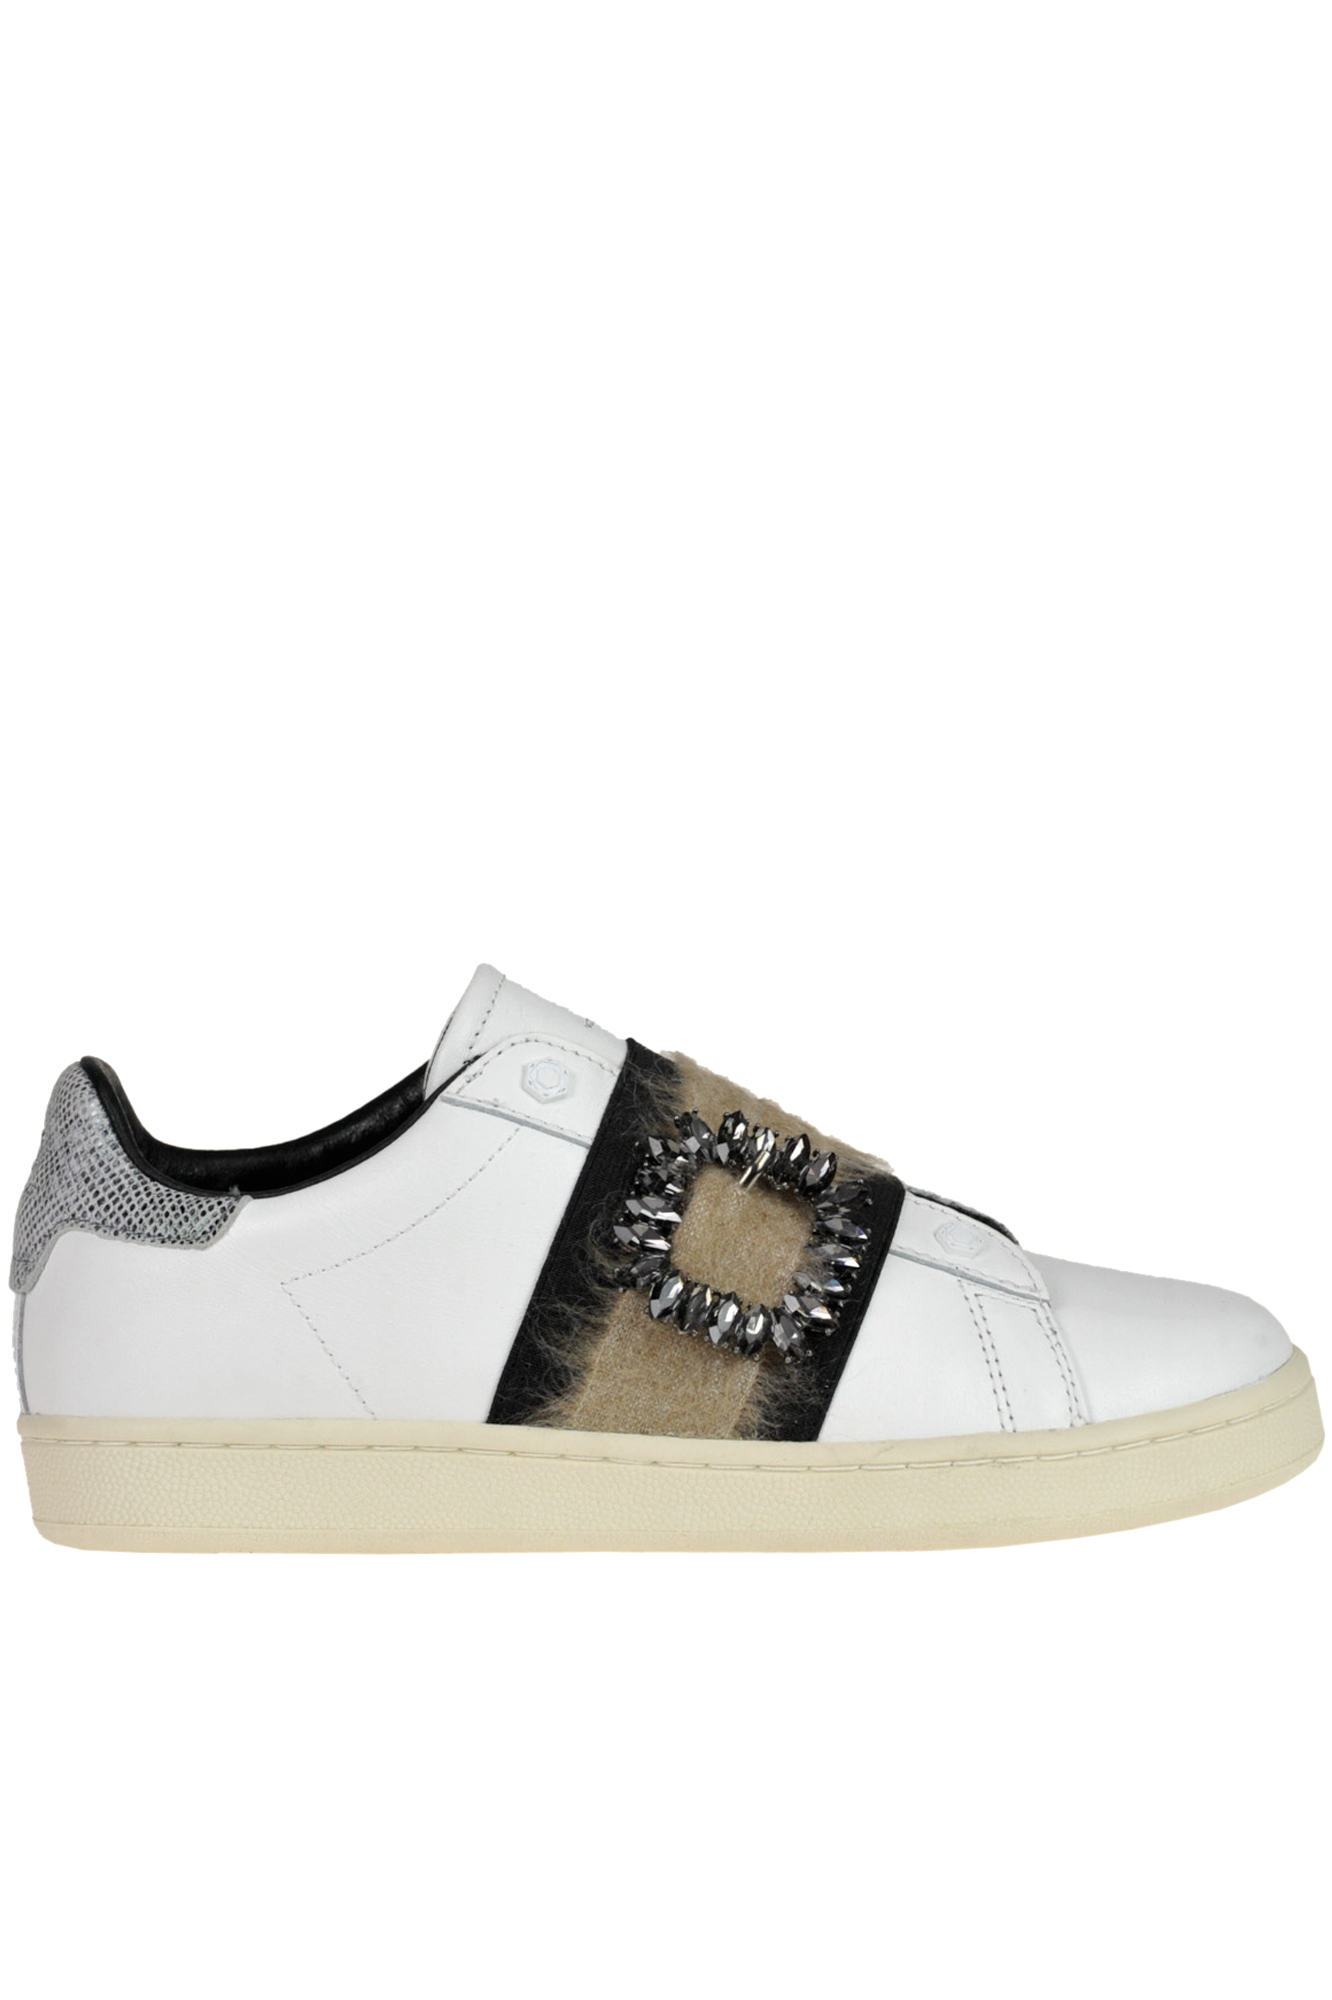 Moa Master Of Arts Leather Slip-on Sneakers In White